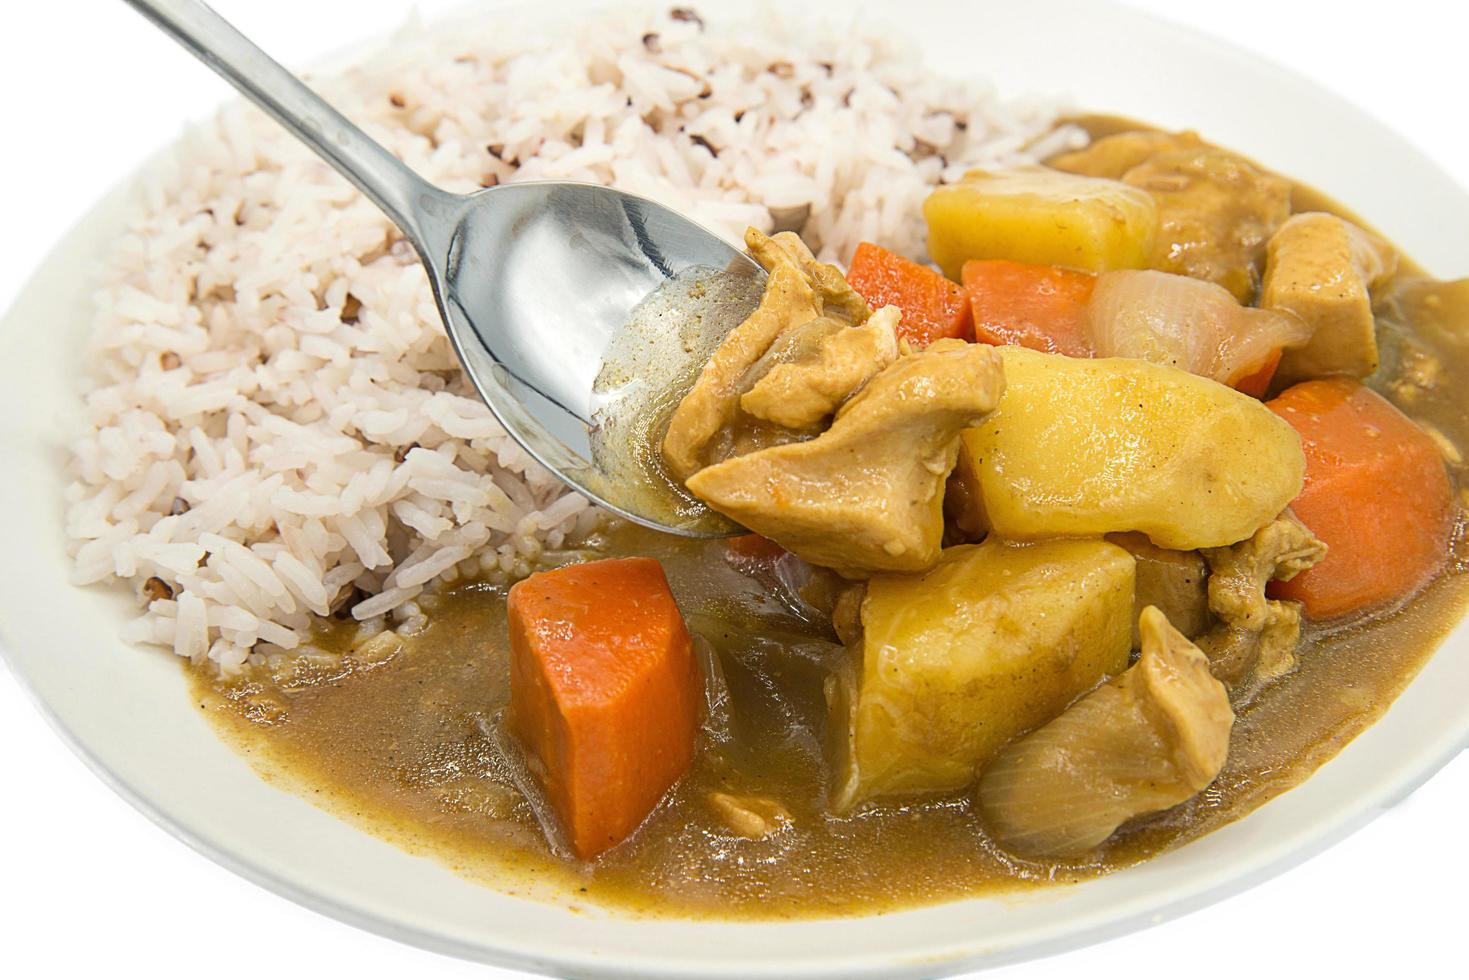 Japanese chicken curry on isolated background. Japanese curry is a thick curry with a stew-like consistency and commonly includes a protein, sweet onions, carrots, and potatoes. photo